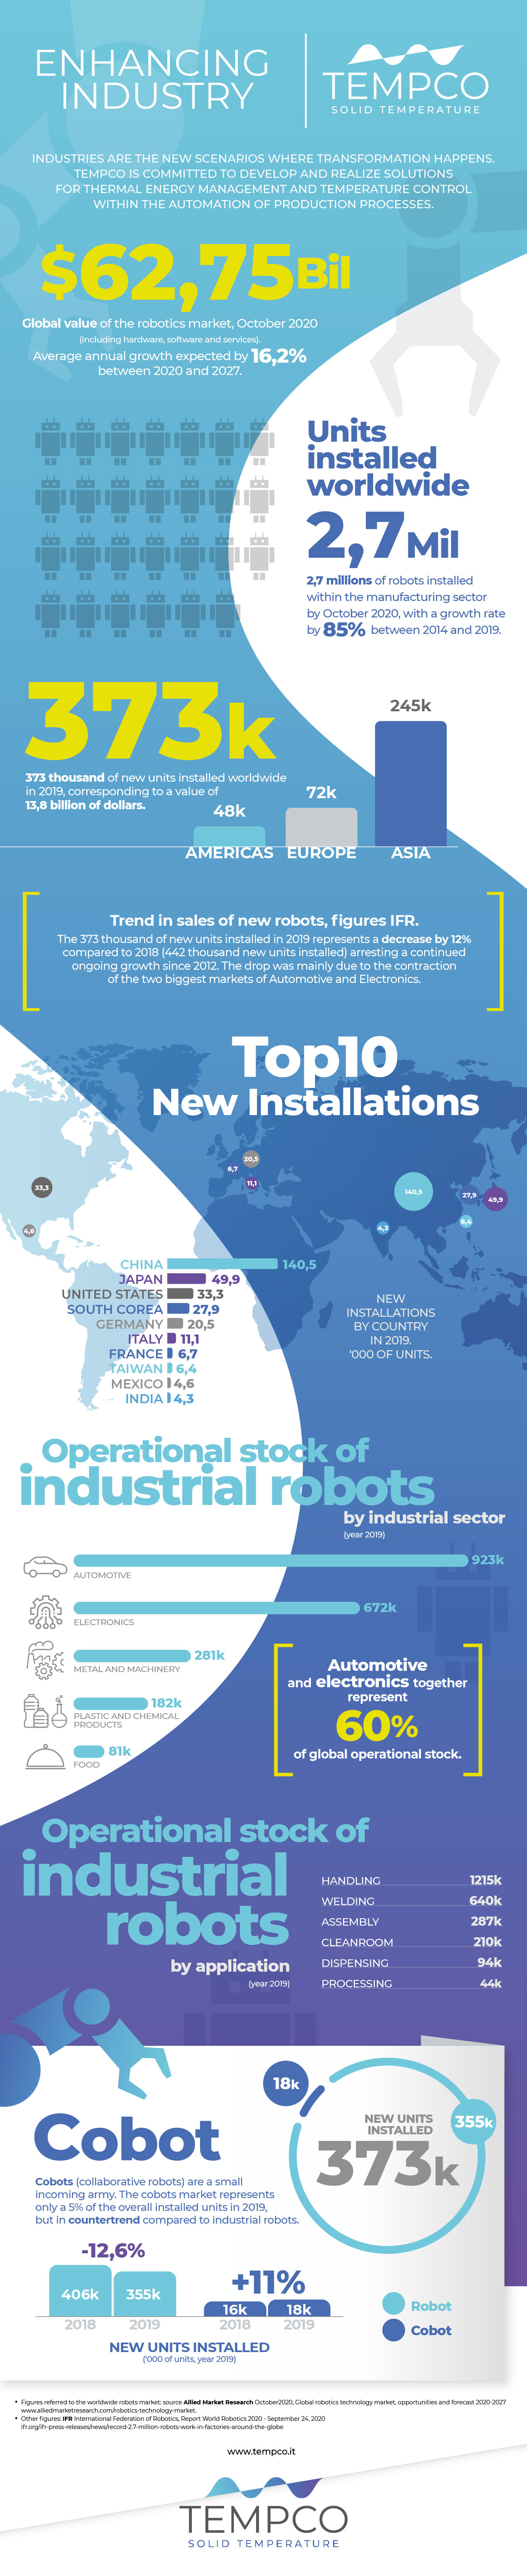 Infographic - Enhancing industry